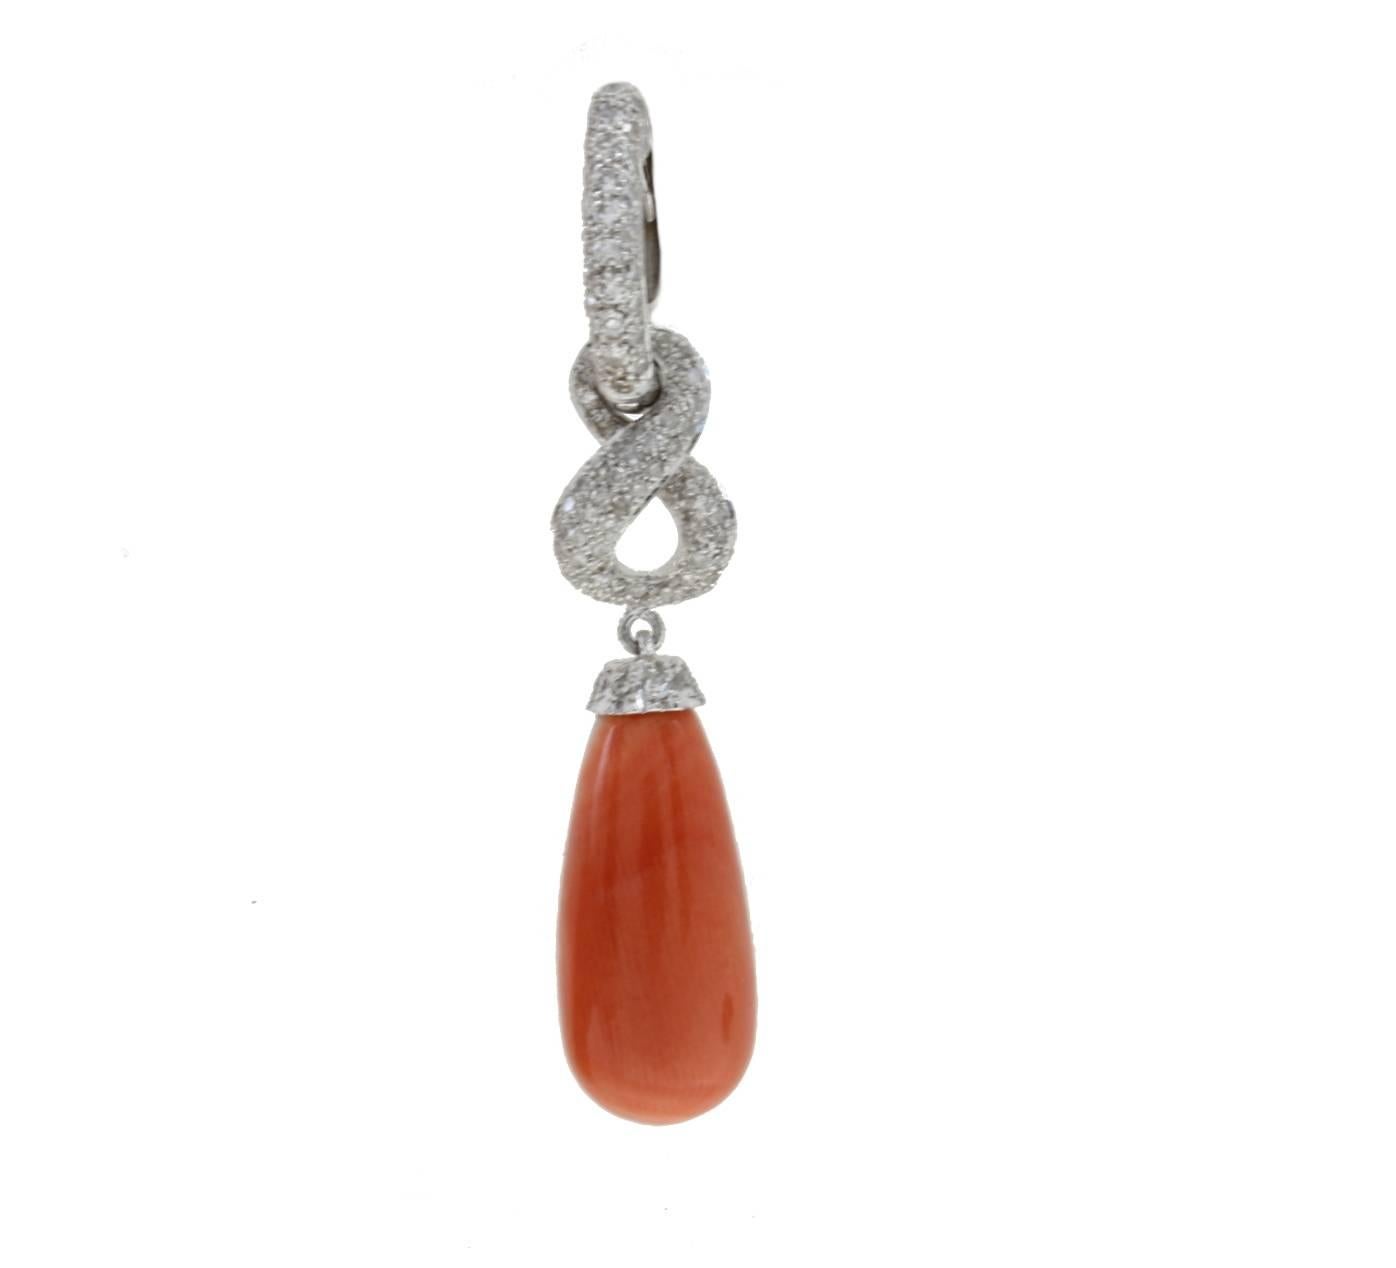 Double use coral eariings in 14klt white gold covered in diamonds.

diaonds 1.27kt
tot weight 10.4gr
r.f. fehi